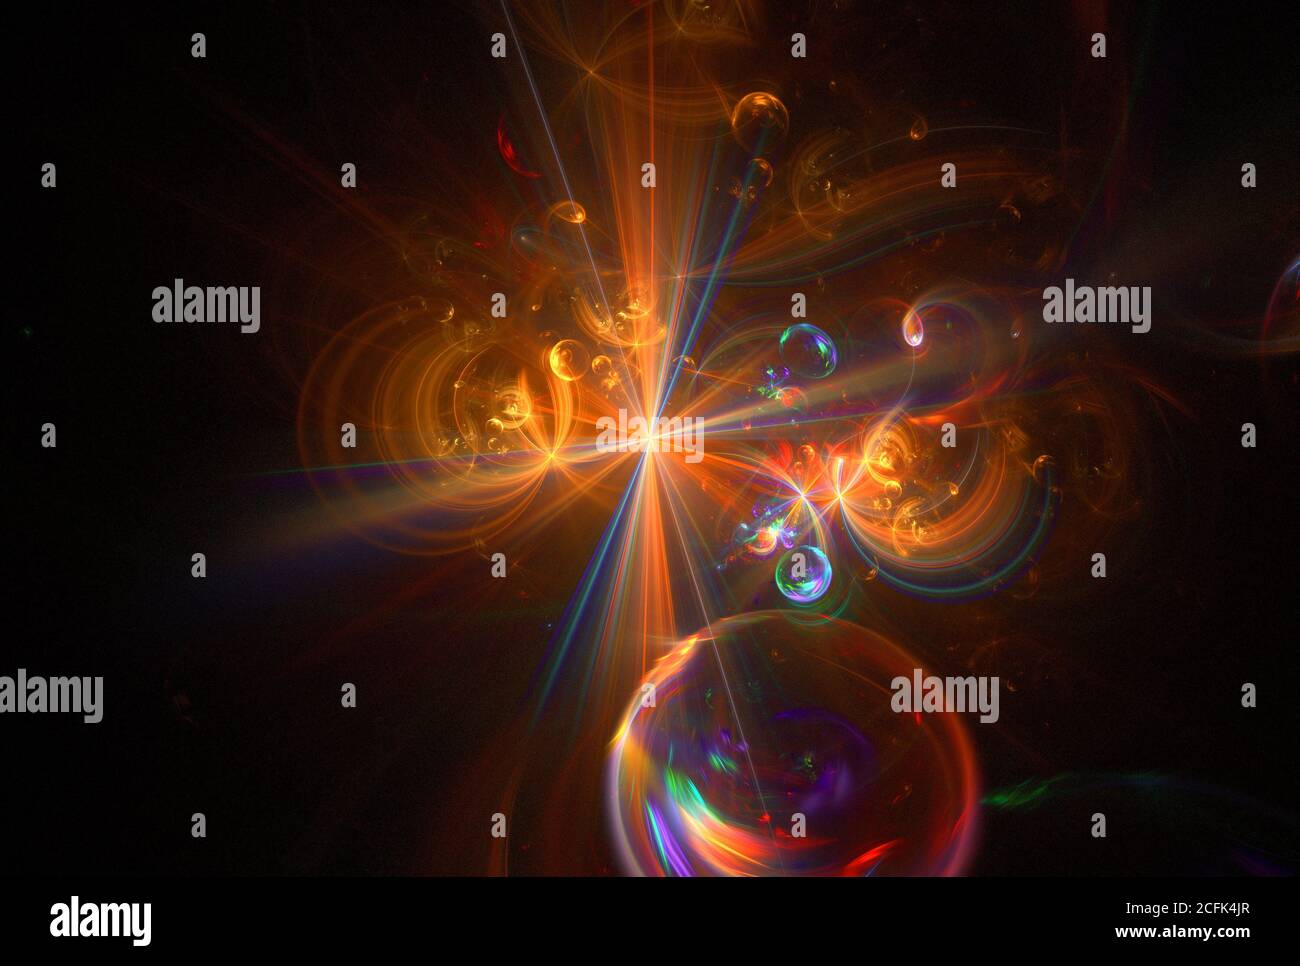 Abstract multi-colored bright computer generated fractal cosmos background Stock Photo